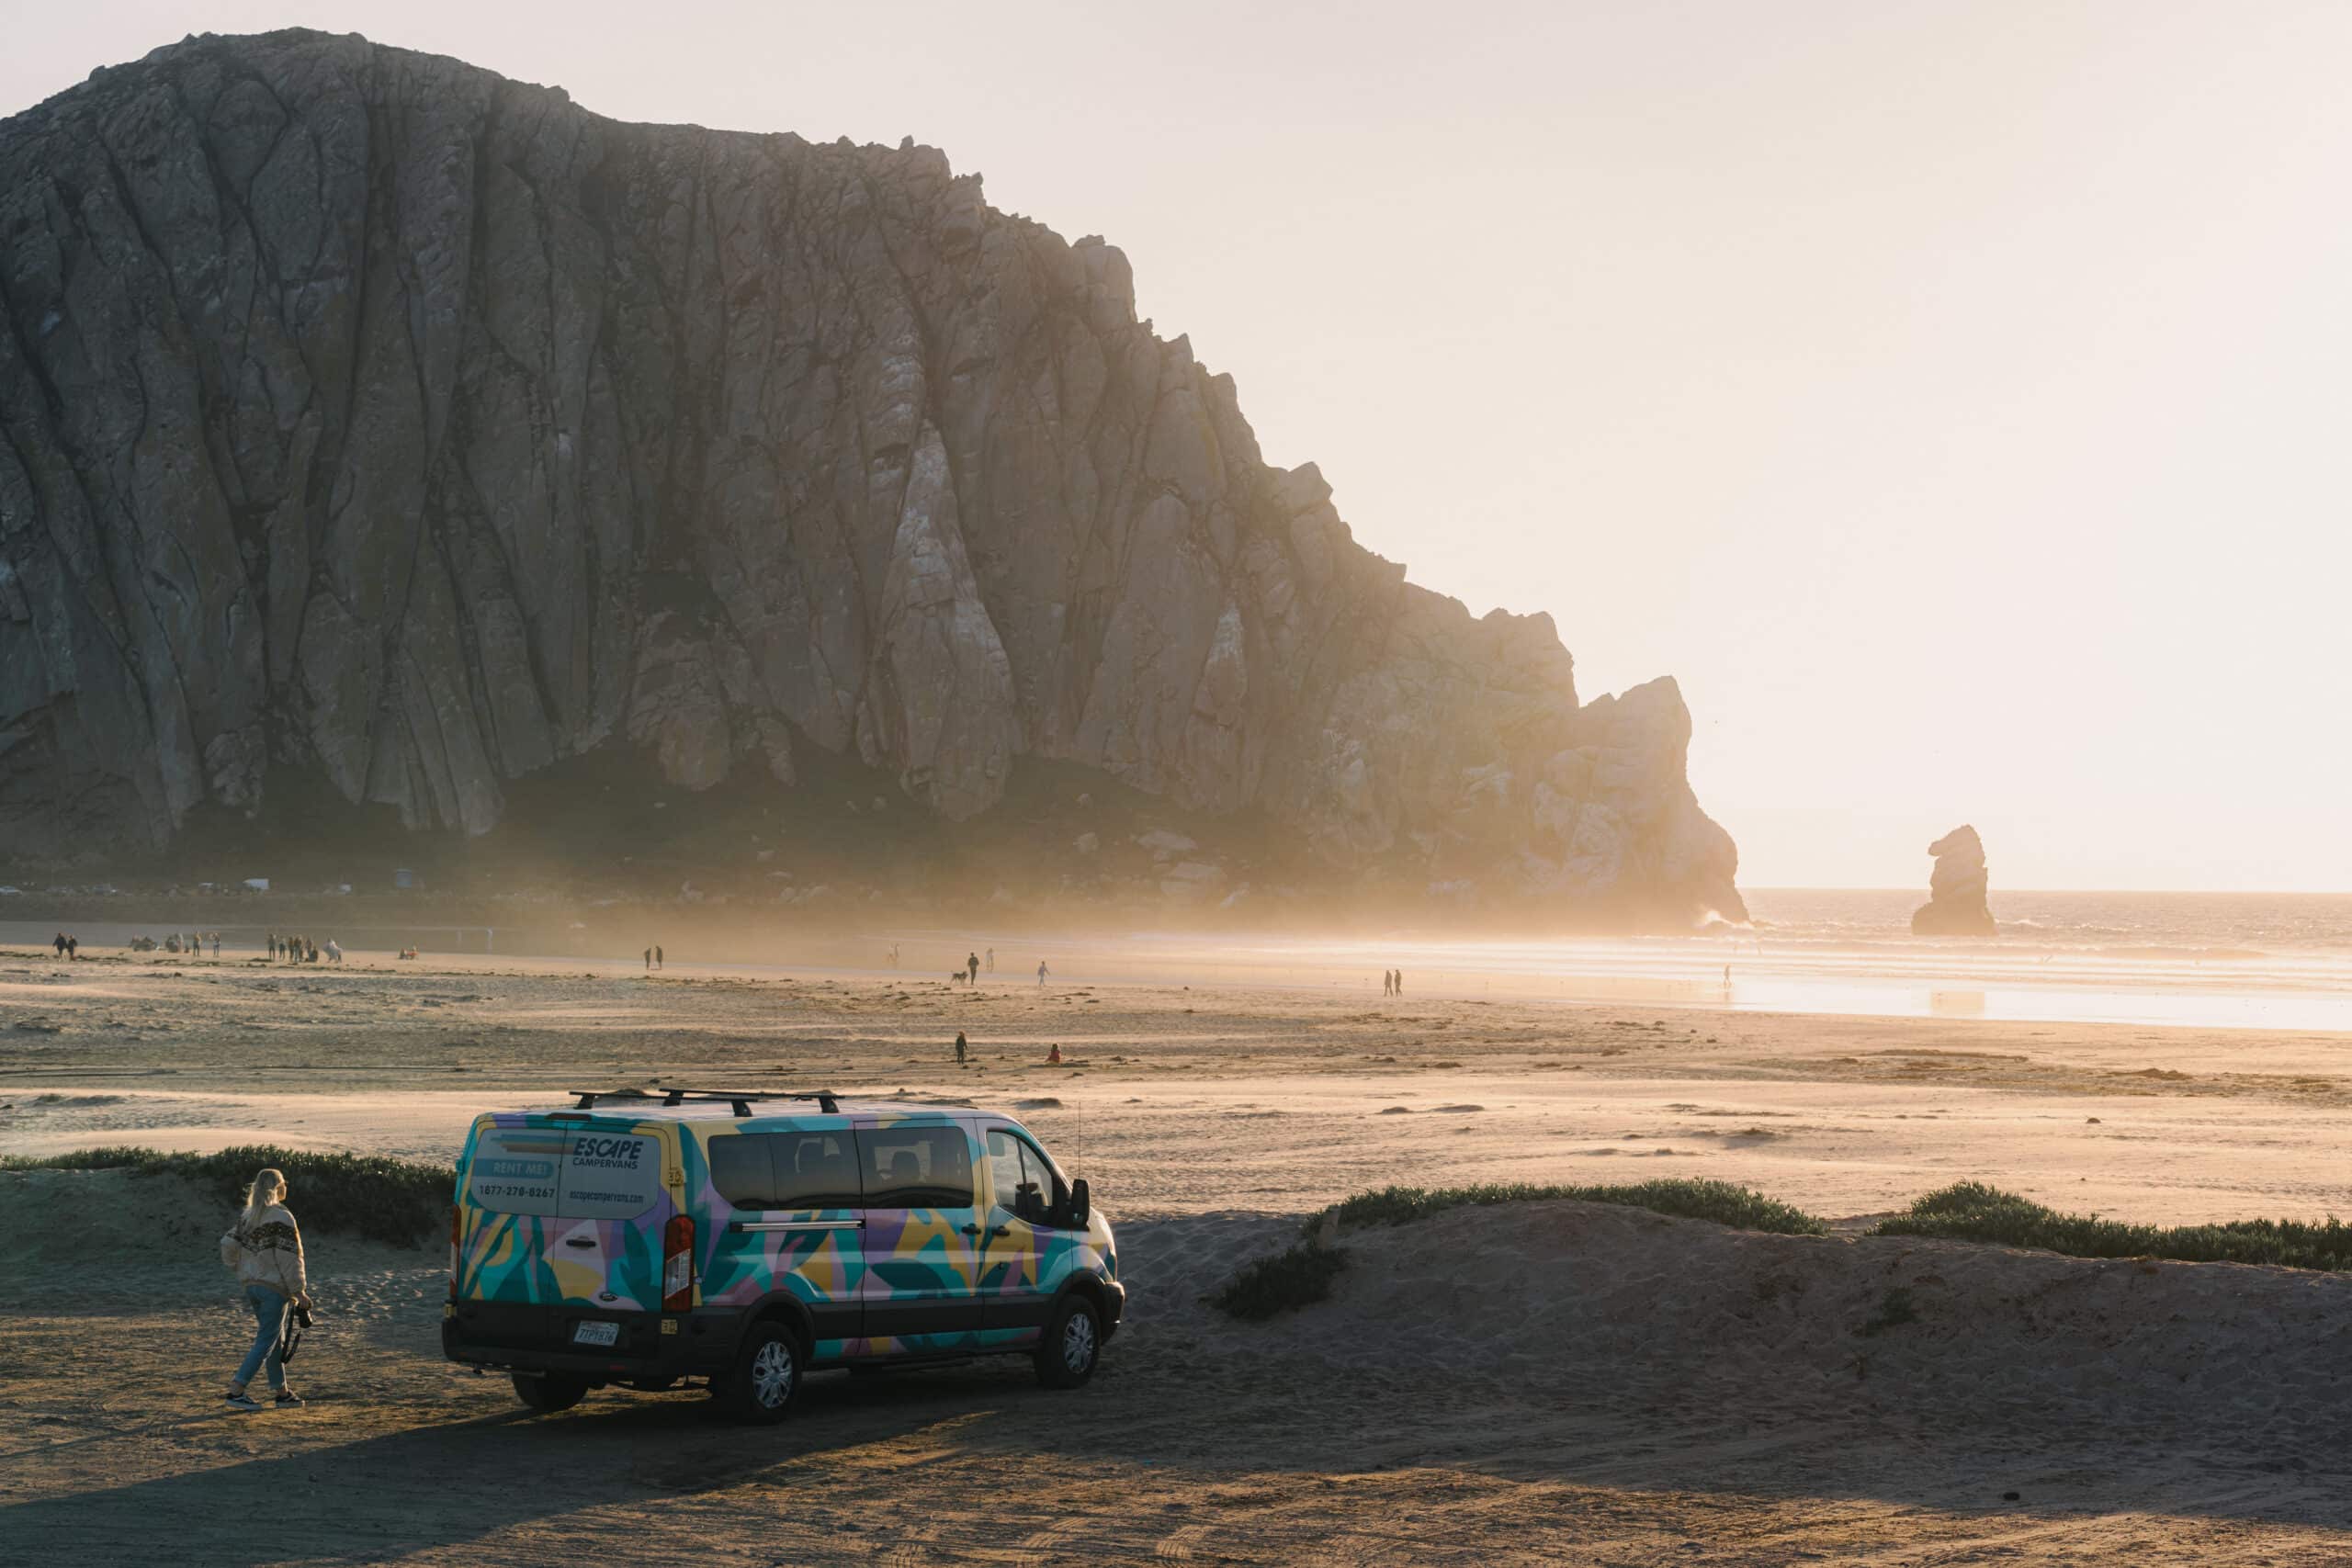 An Escape camper van parked by a California beach. A camper van is the best way to experience a Pacific Coast highway road trip.